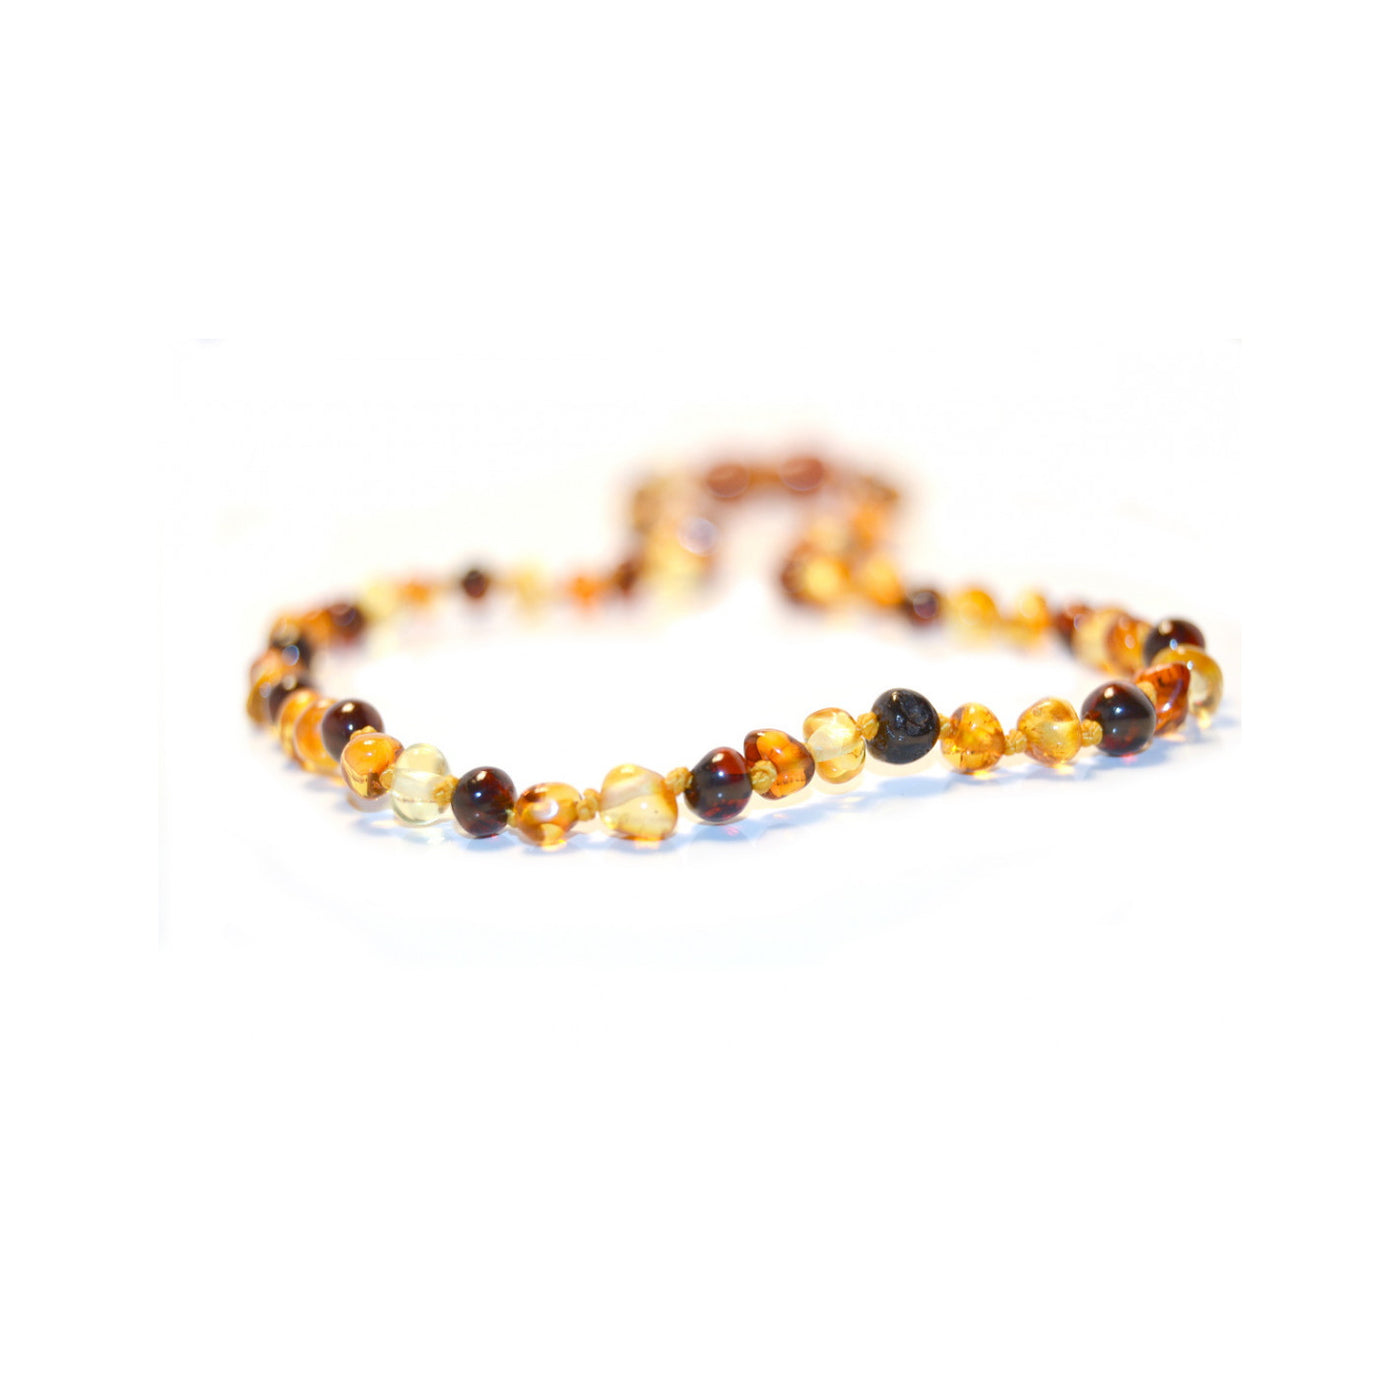 Amber Bead Necklace - Multi-colour